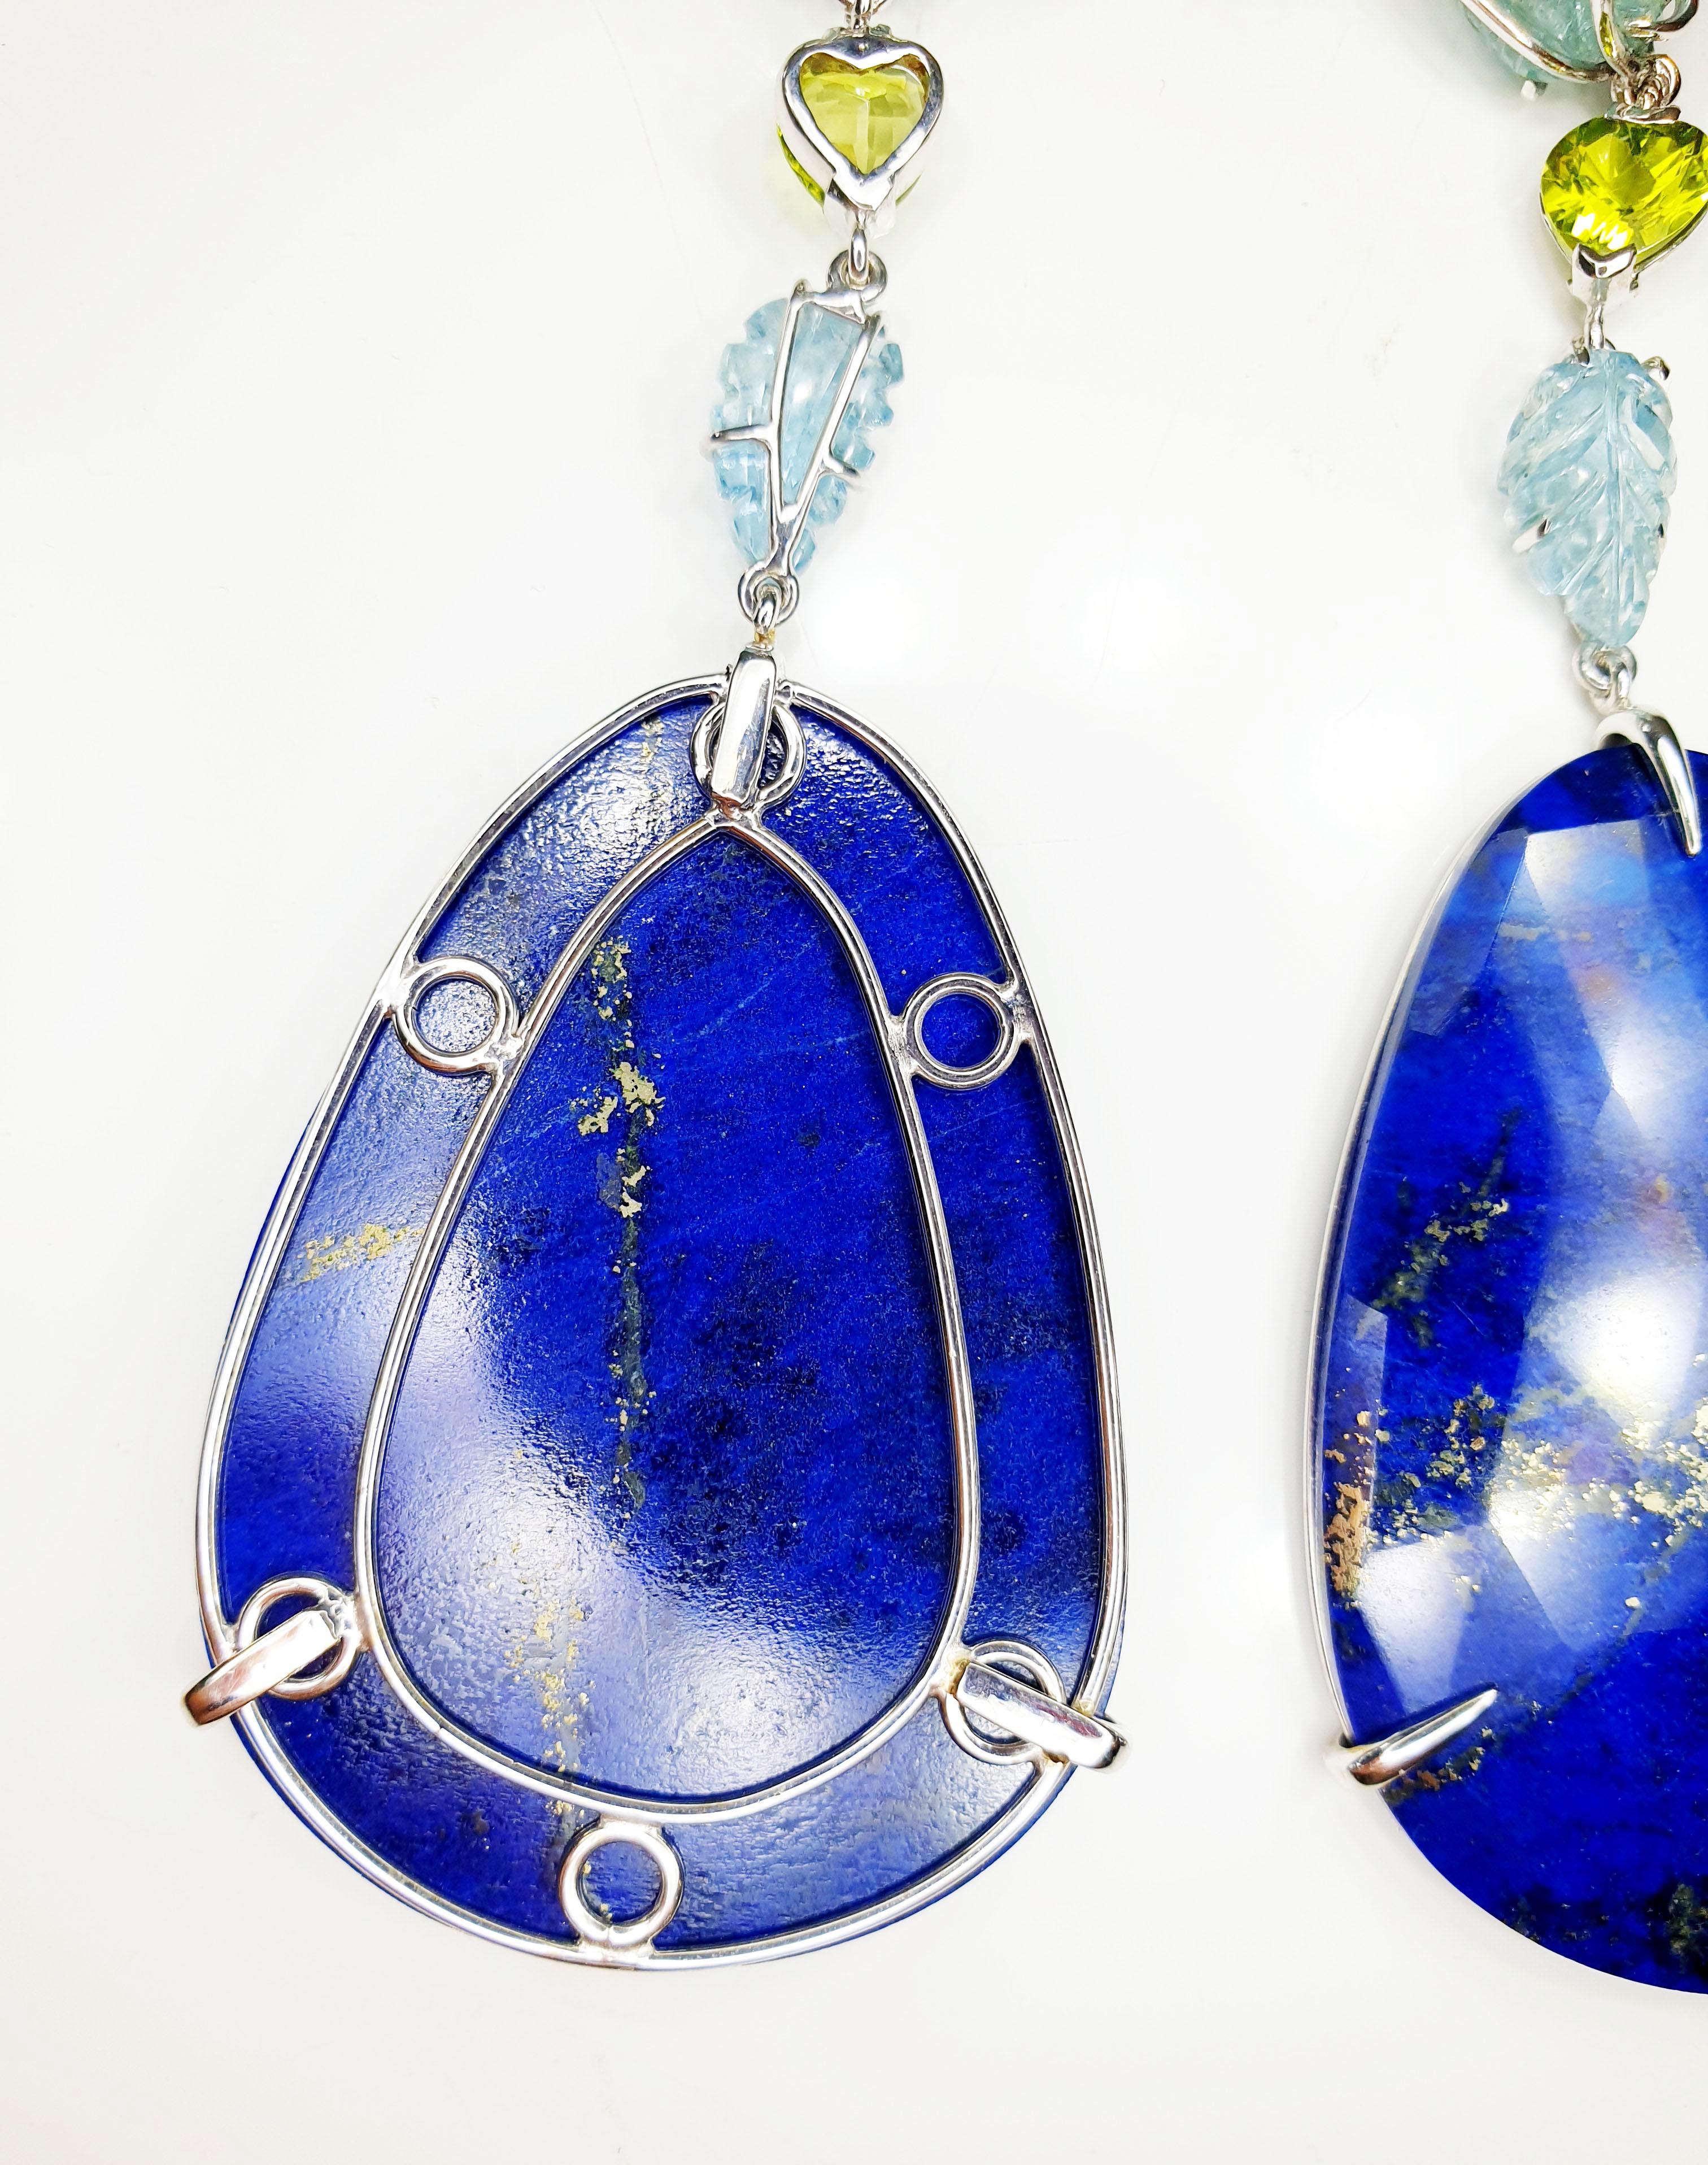 Contemporary Carved Leafs Aquamarines Peridot in 18k Gold Earrings with Lapis Lazuli Drops For Sale